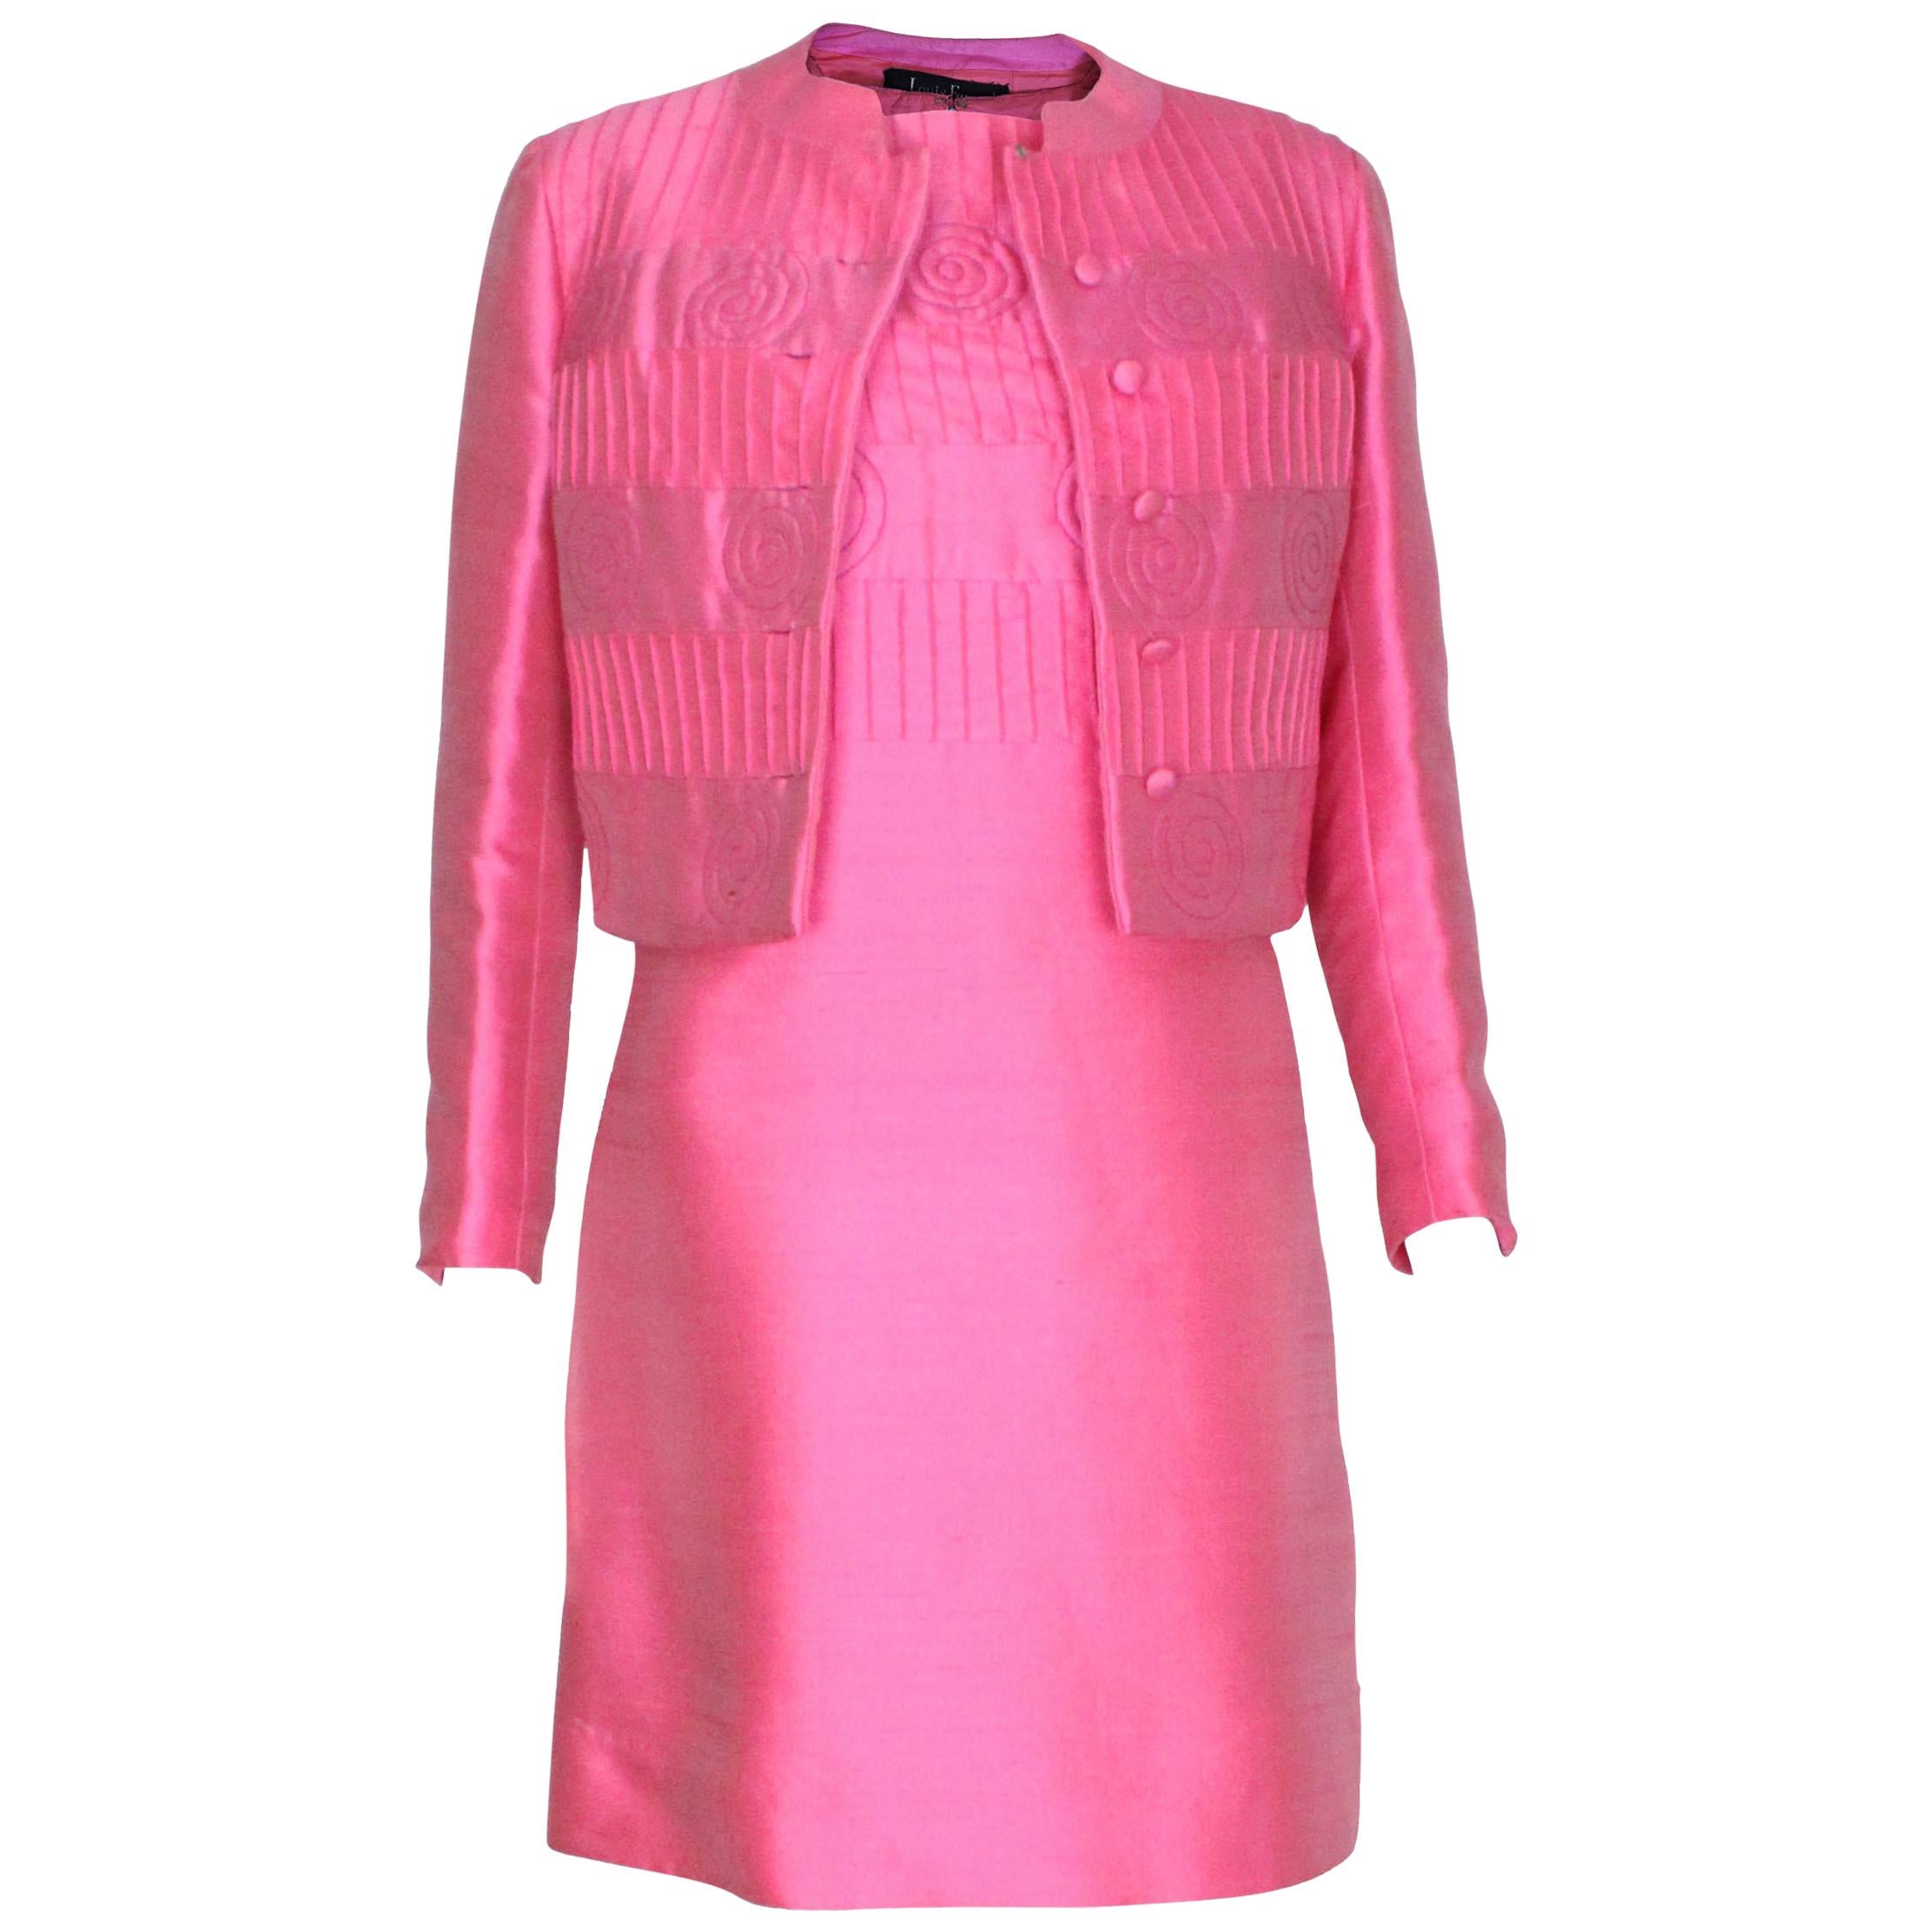 A vintage 1960s Pink Dress and Jacket  by Louis Feraud for Rembrant 